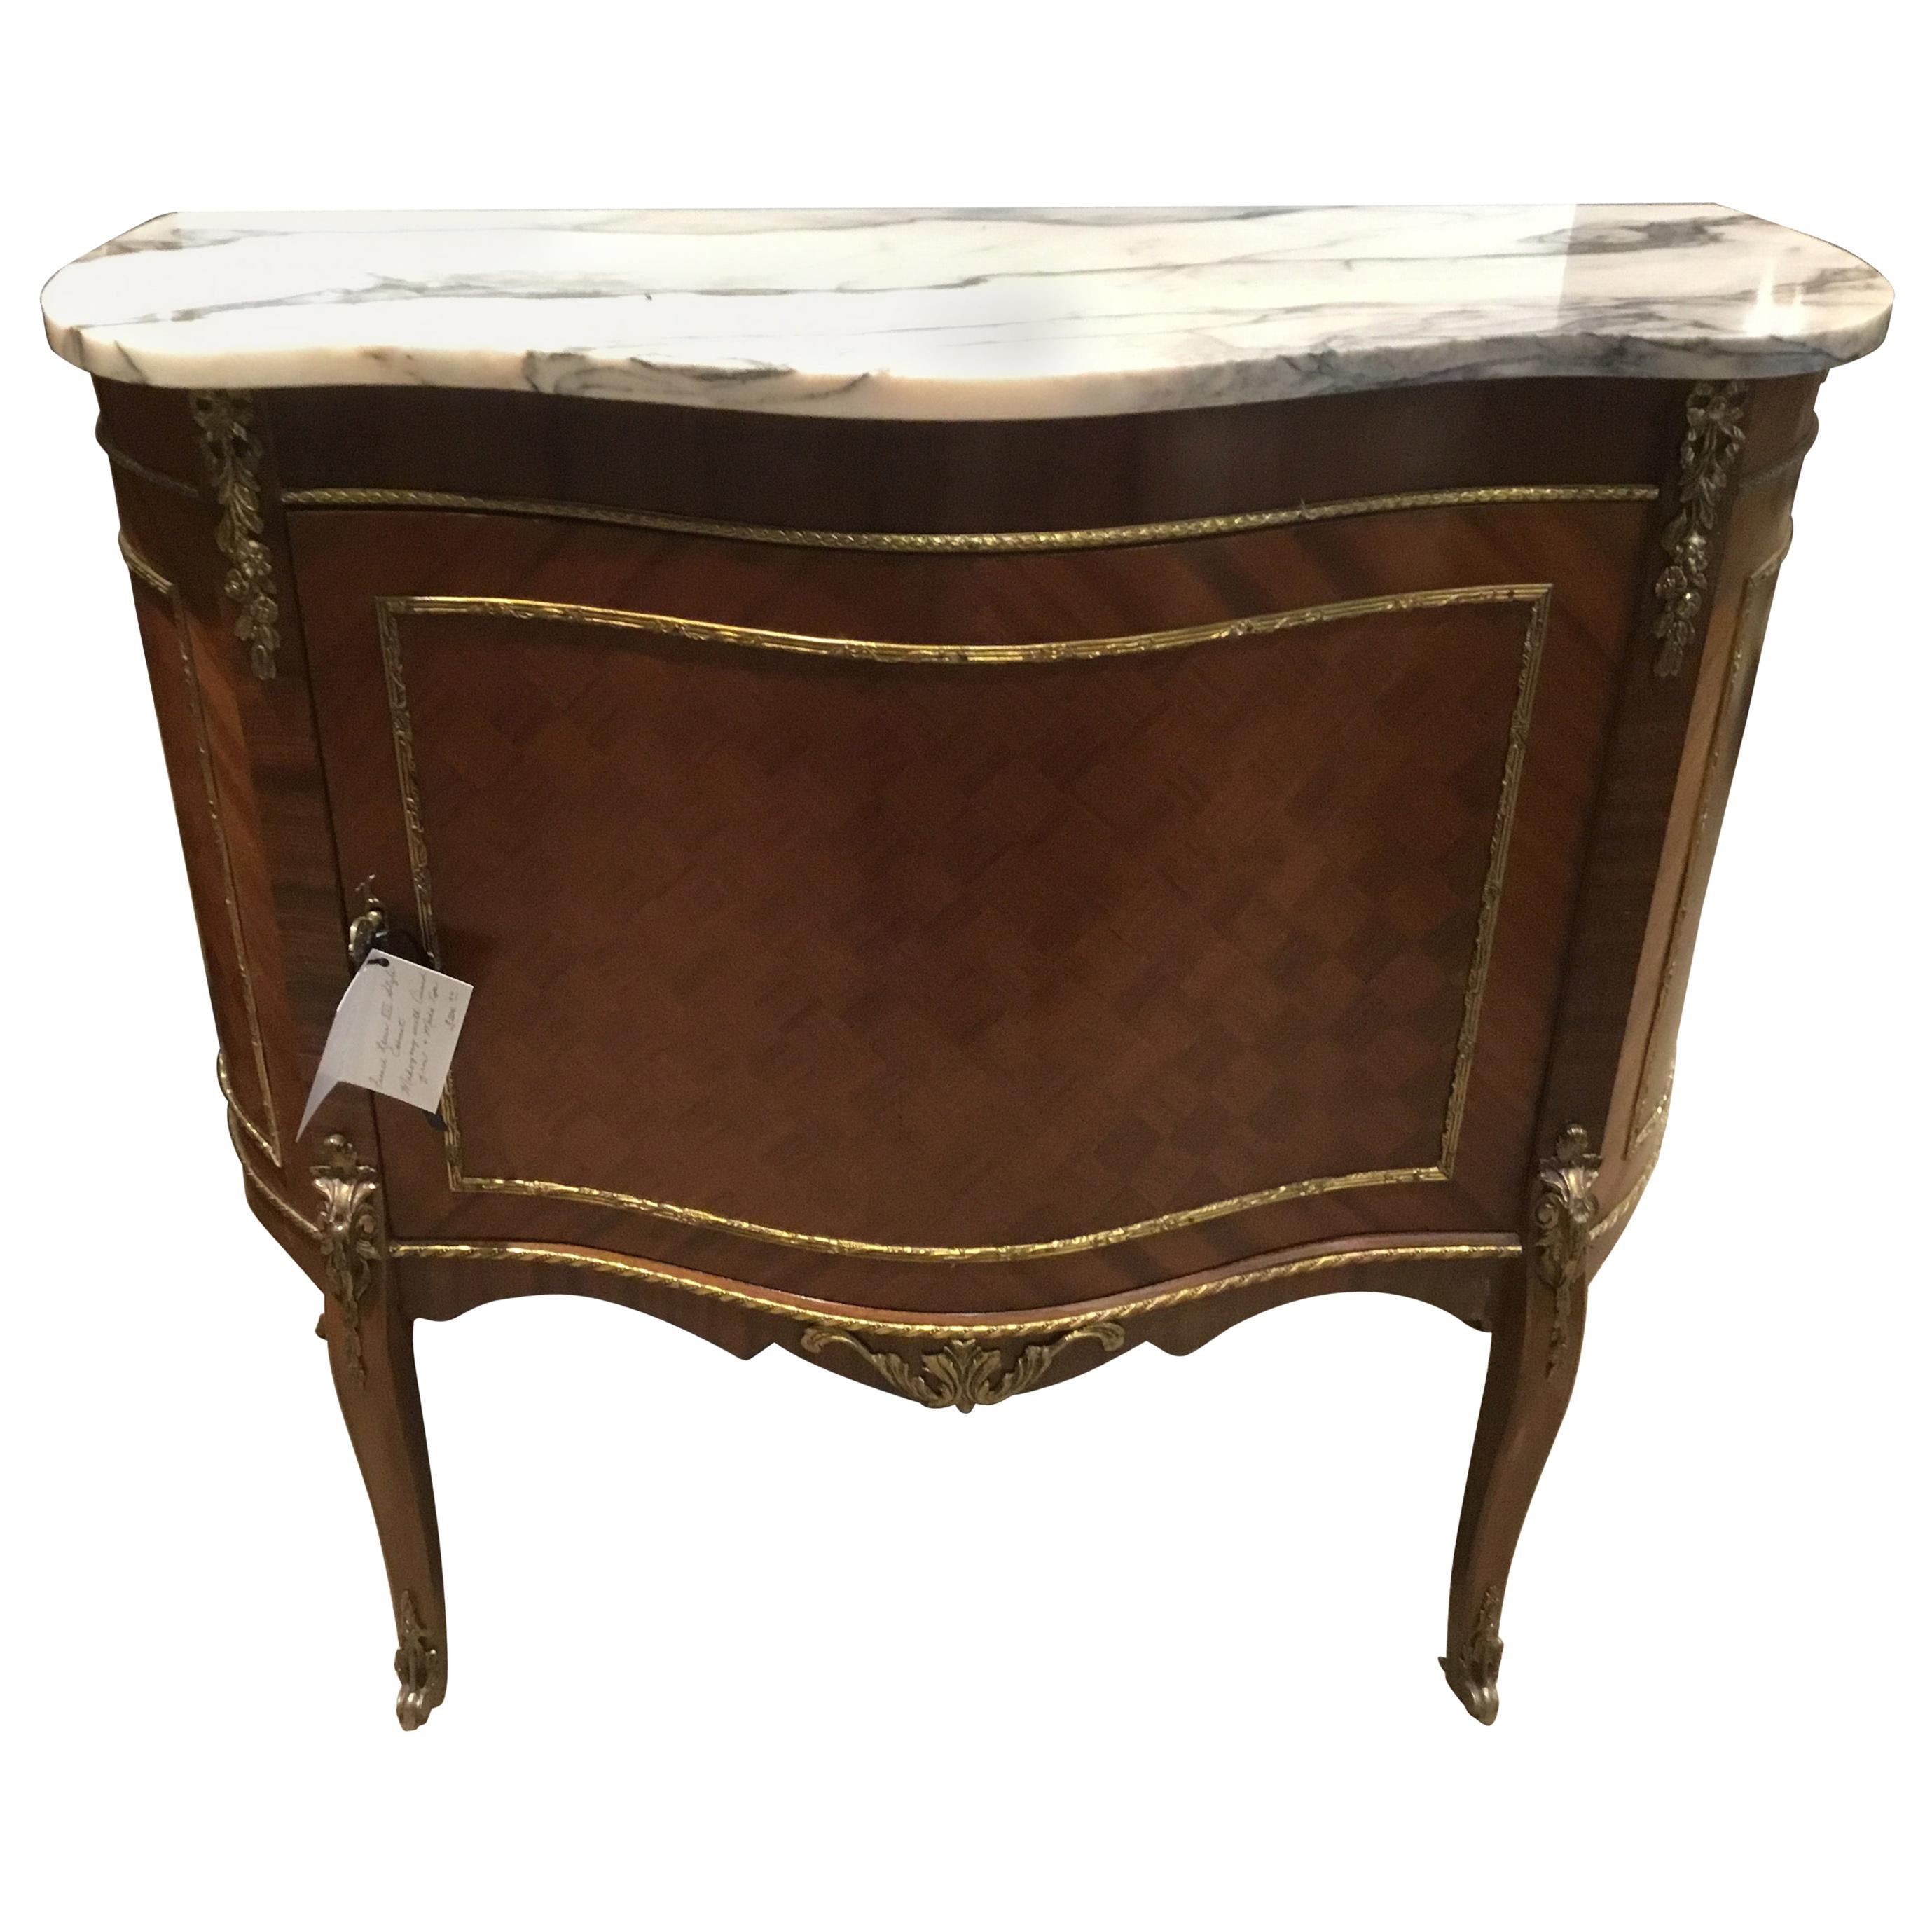 French Louis XVI Style Marble Top Mahogany Cabinet with Marquetry Inlay, Ormolu